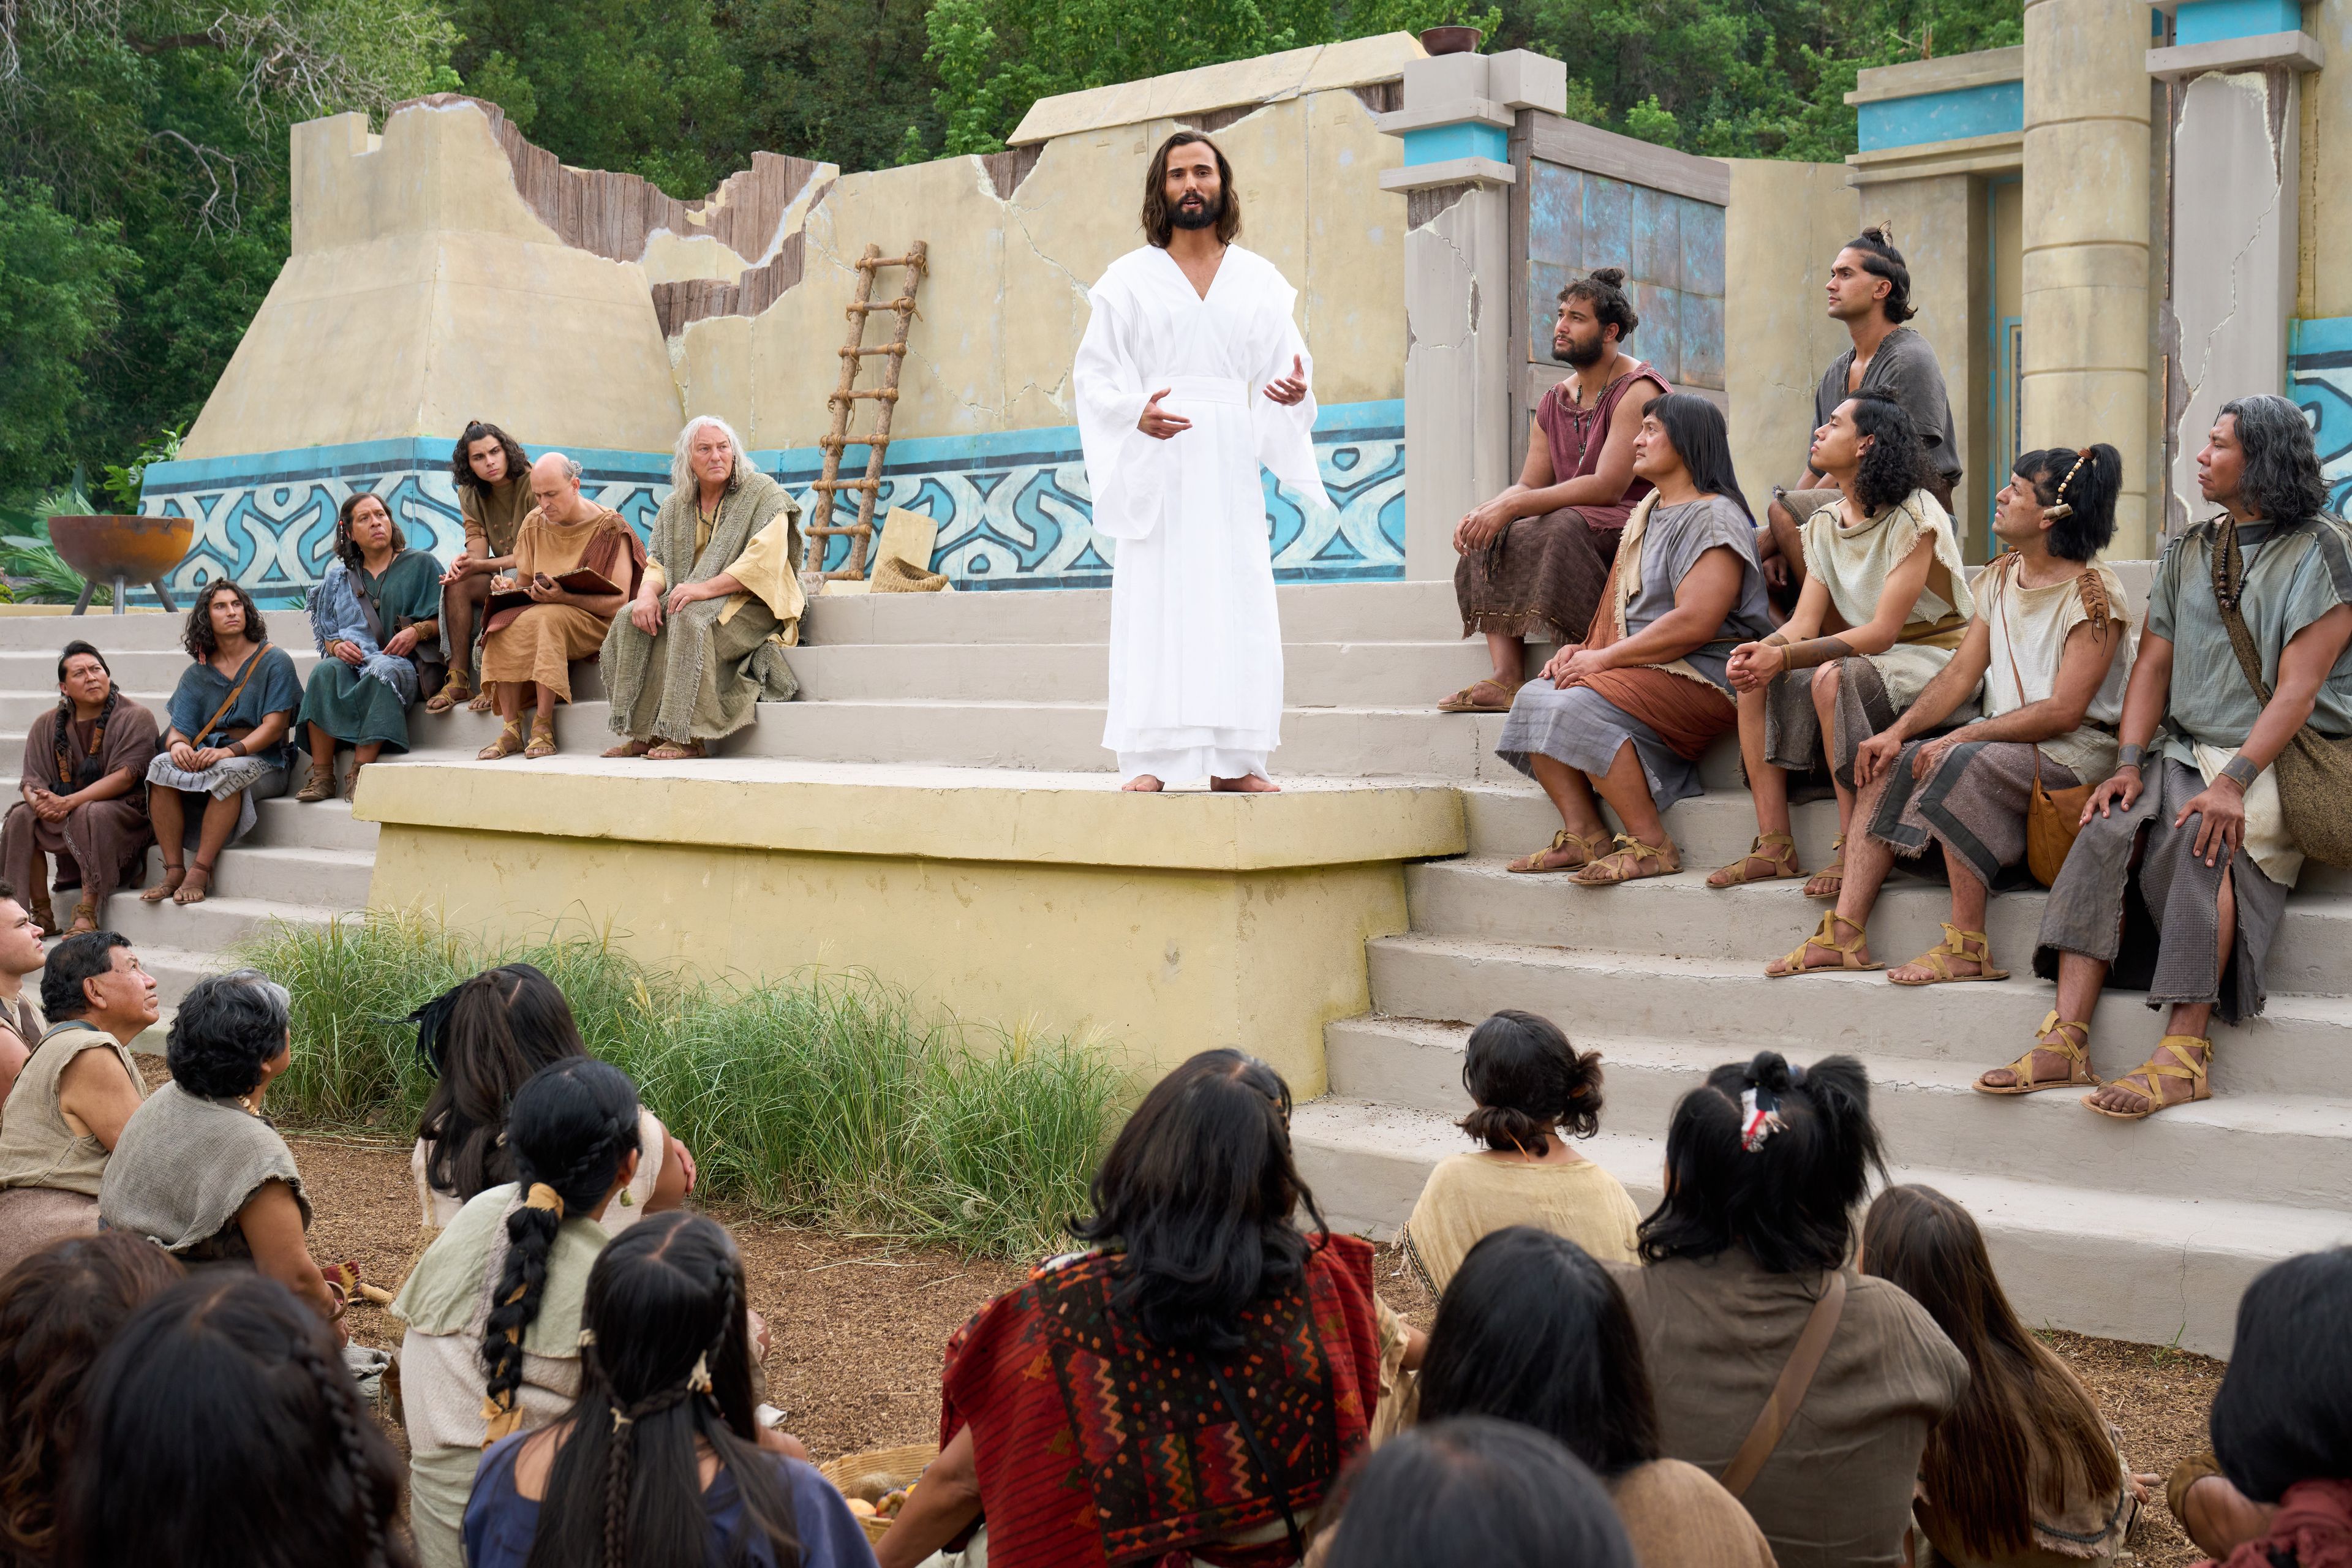 The resurrected Savior, Jesus Christ, teaches the people his Gospel. The Twelve Disciples sit on either side of him.